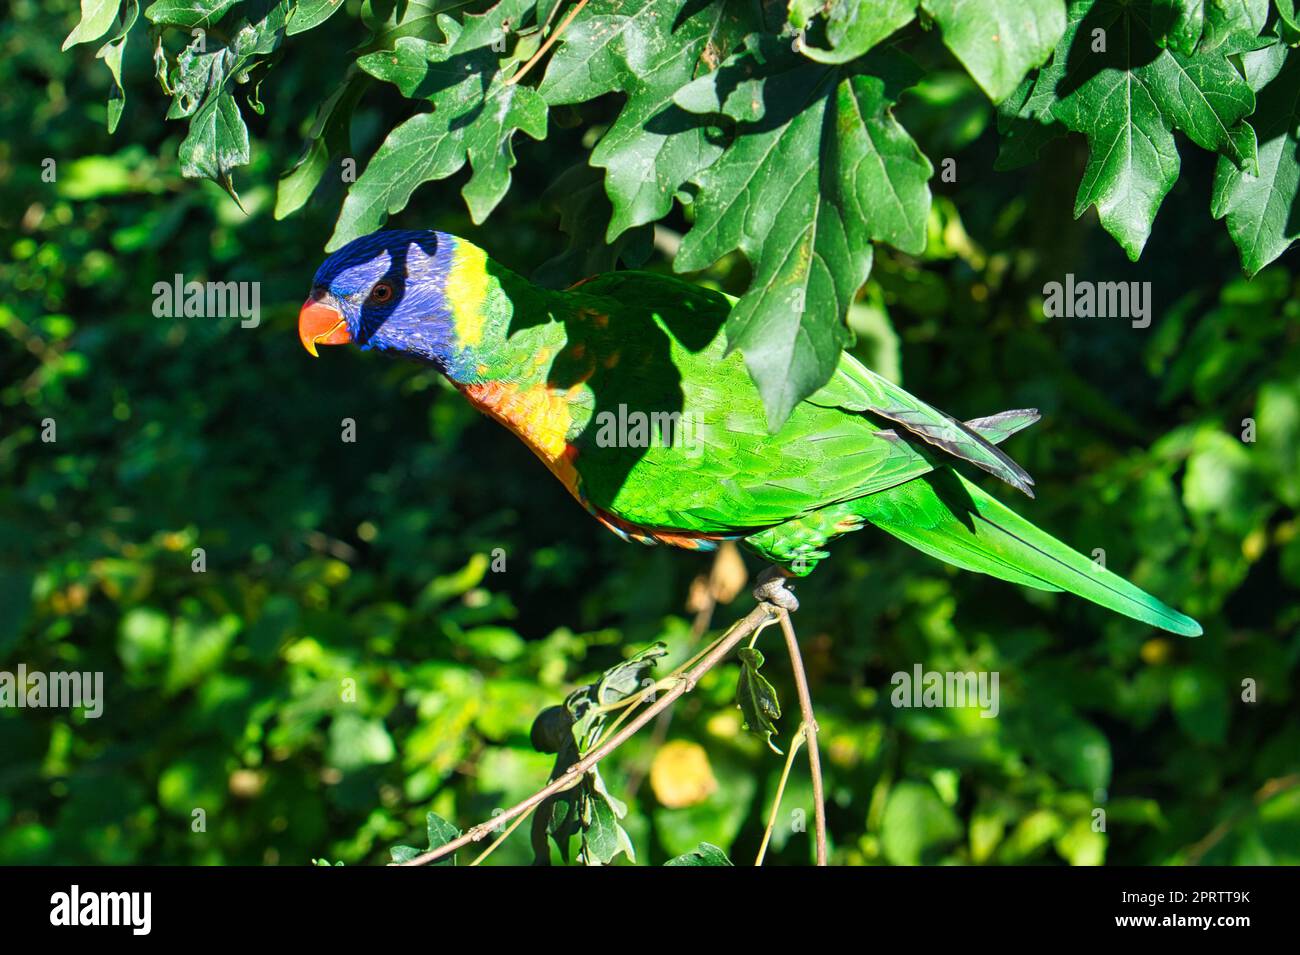 lori in foliage, colorful parrot species. Stock Photo